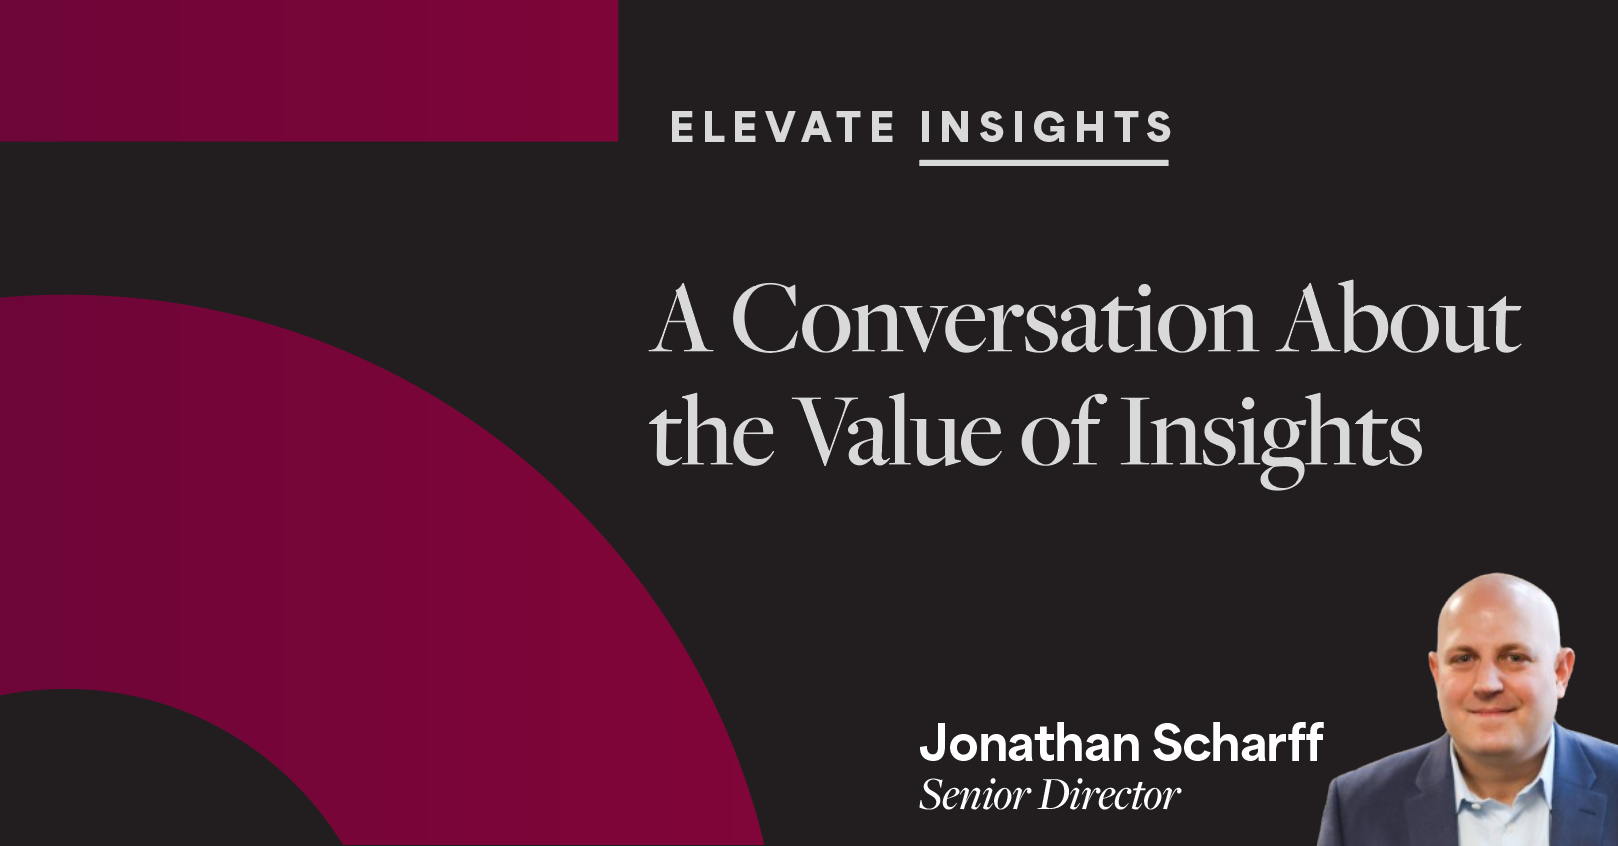 Elevate insights: A conversation about the value of insights with Jonathan Scharff, Senior Director at Avoq